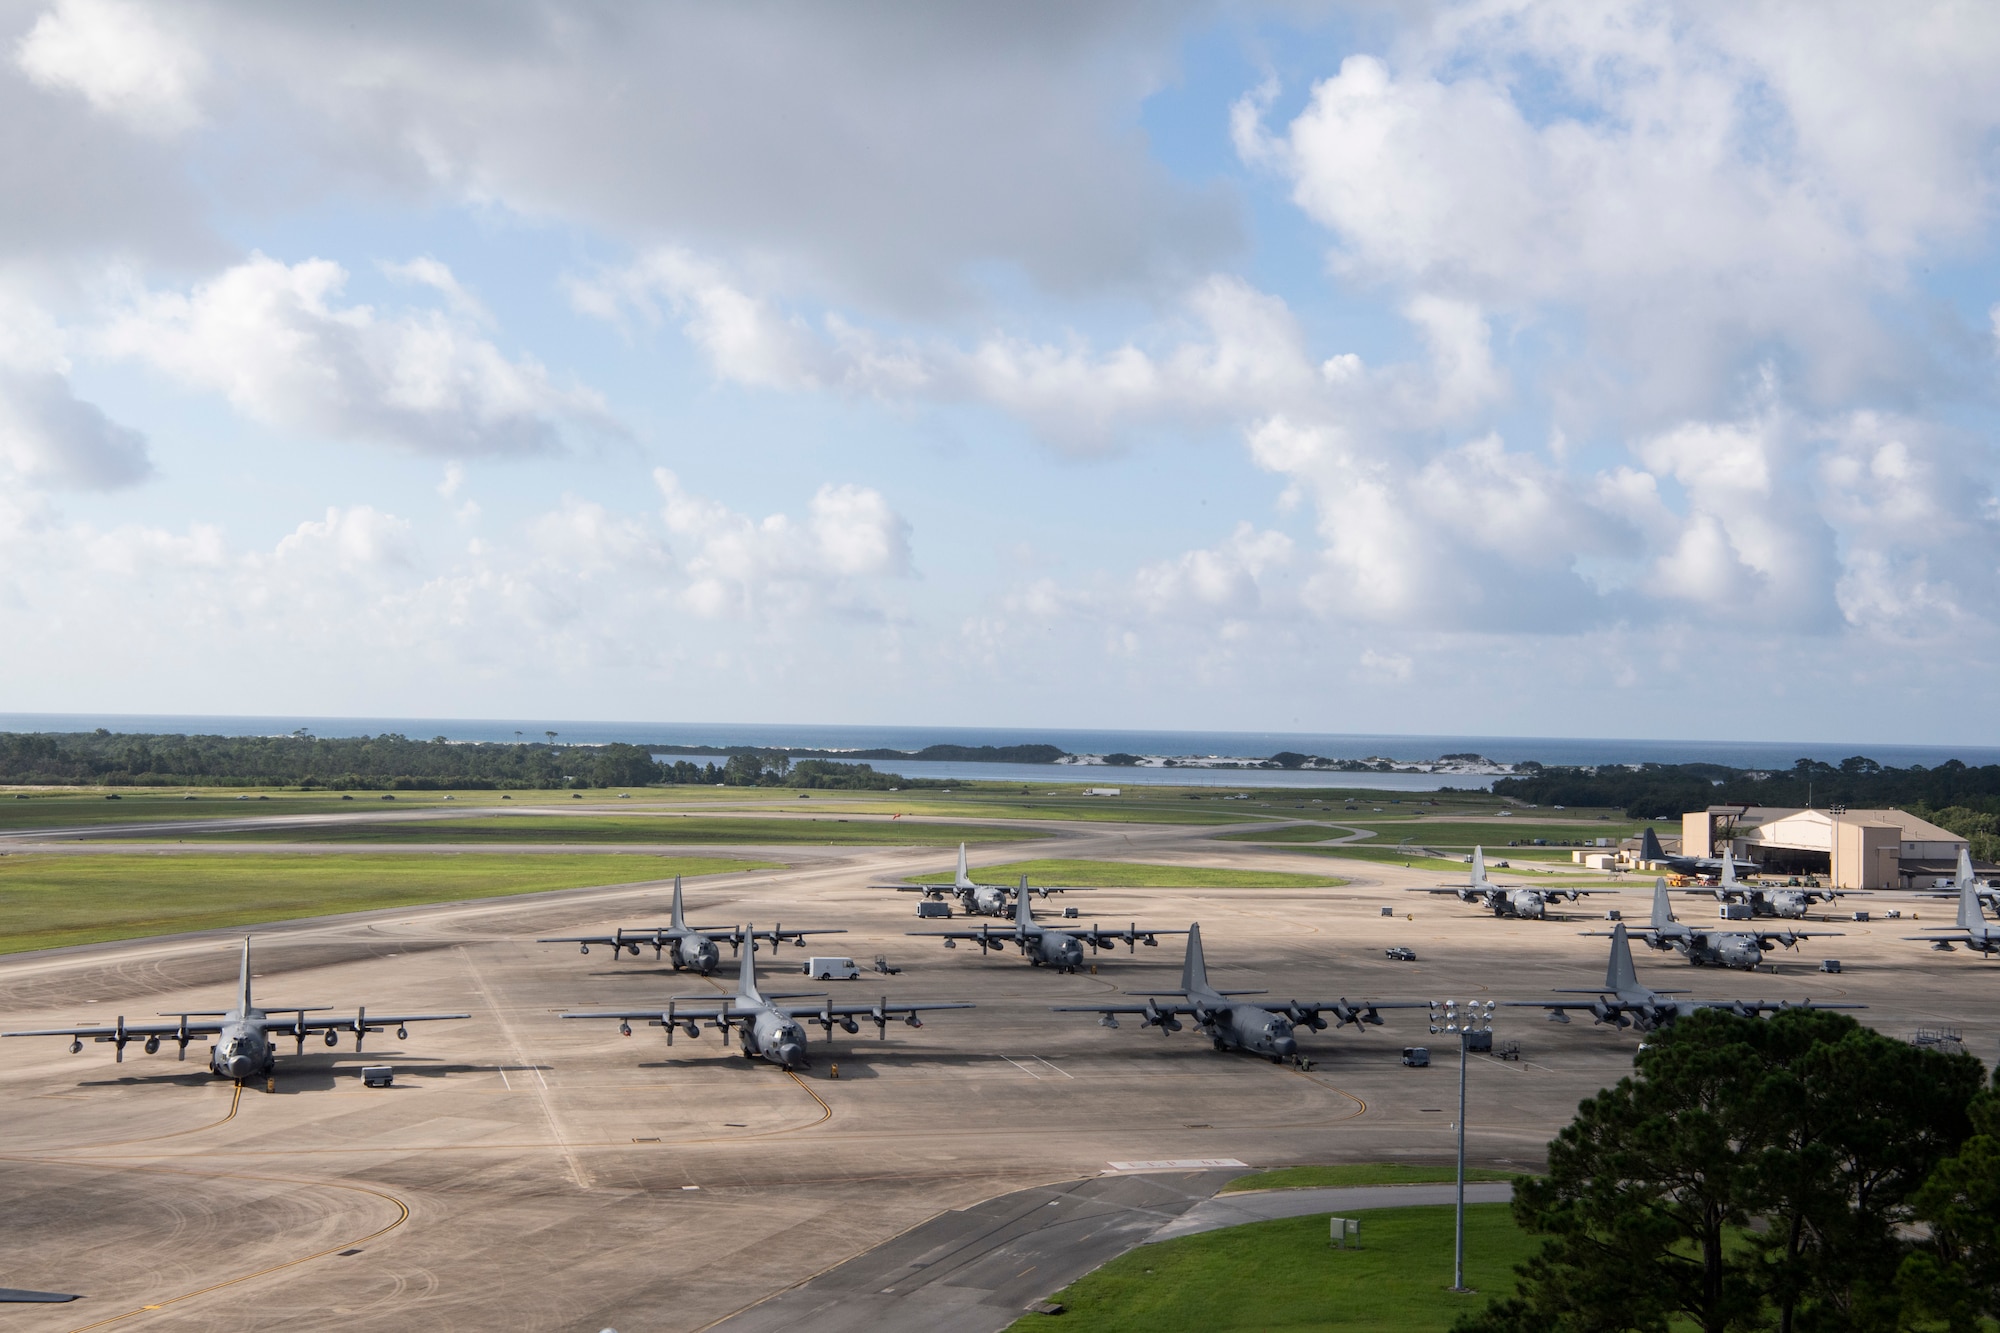 A portion of Hurlburt Field’s C-130 fleet rests on the flightline at Hurlburt Field, Florida, July 22, 2021. Air Force Special Operations Command (AFSOC) uses several specialized C-130s to accomplish their mission, but they’re all maintained by the 1st Special Operations Maintenance Squadron. (U.S. Air Force photo by Staff Sgt. Janiqua P. Robinson)